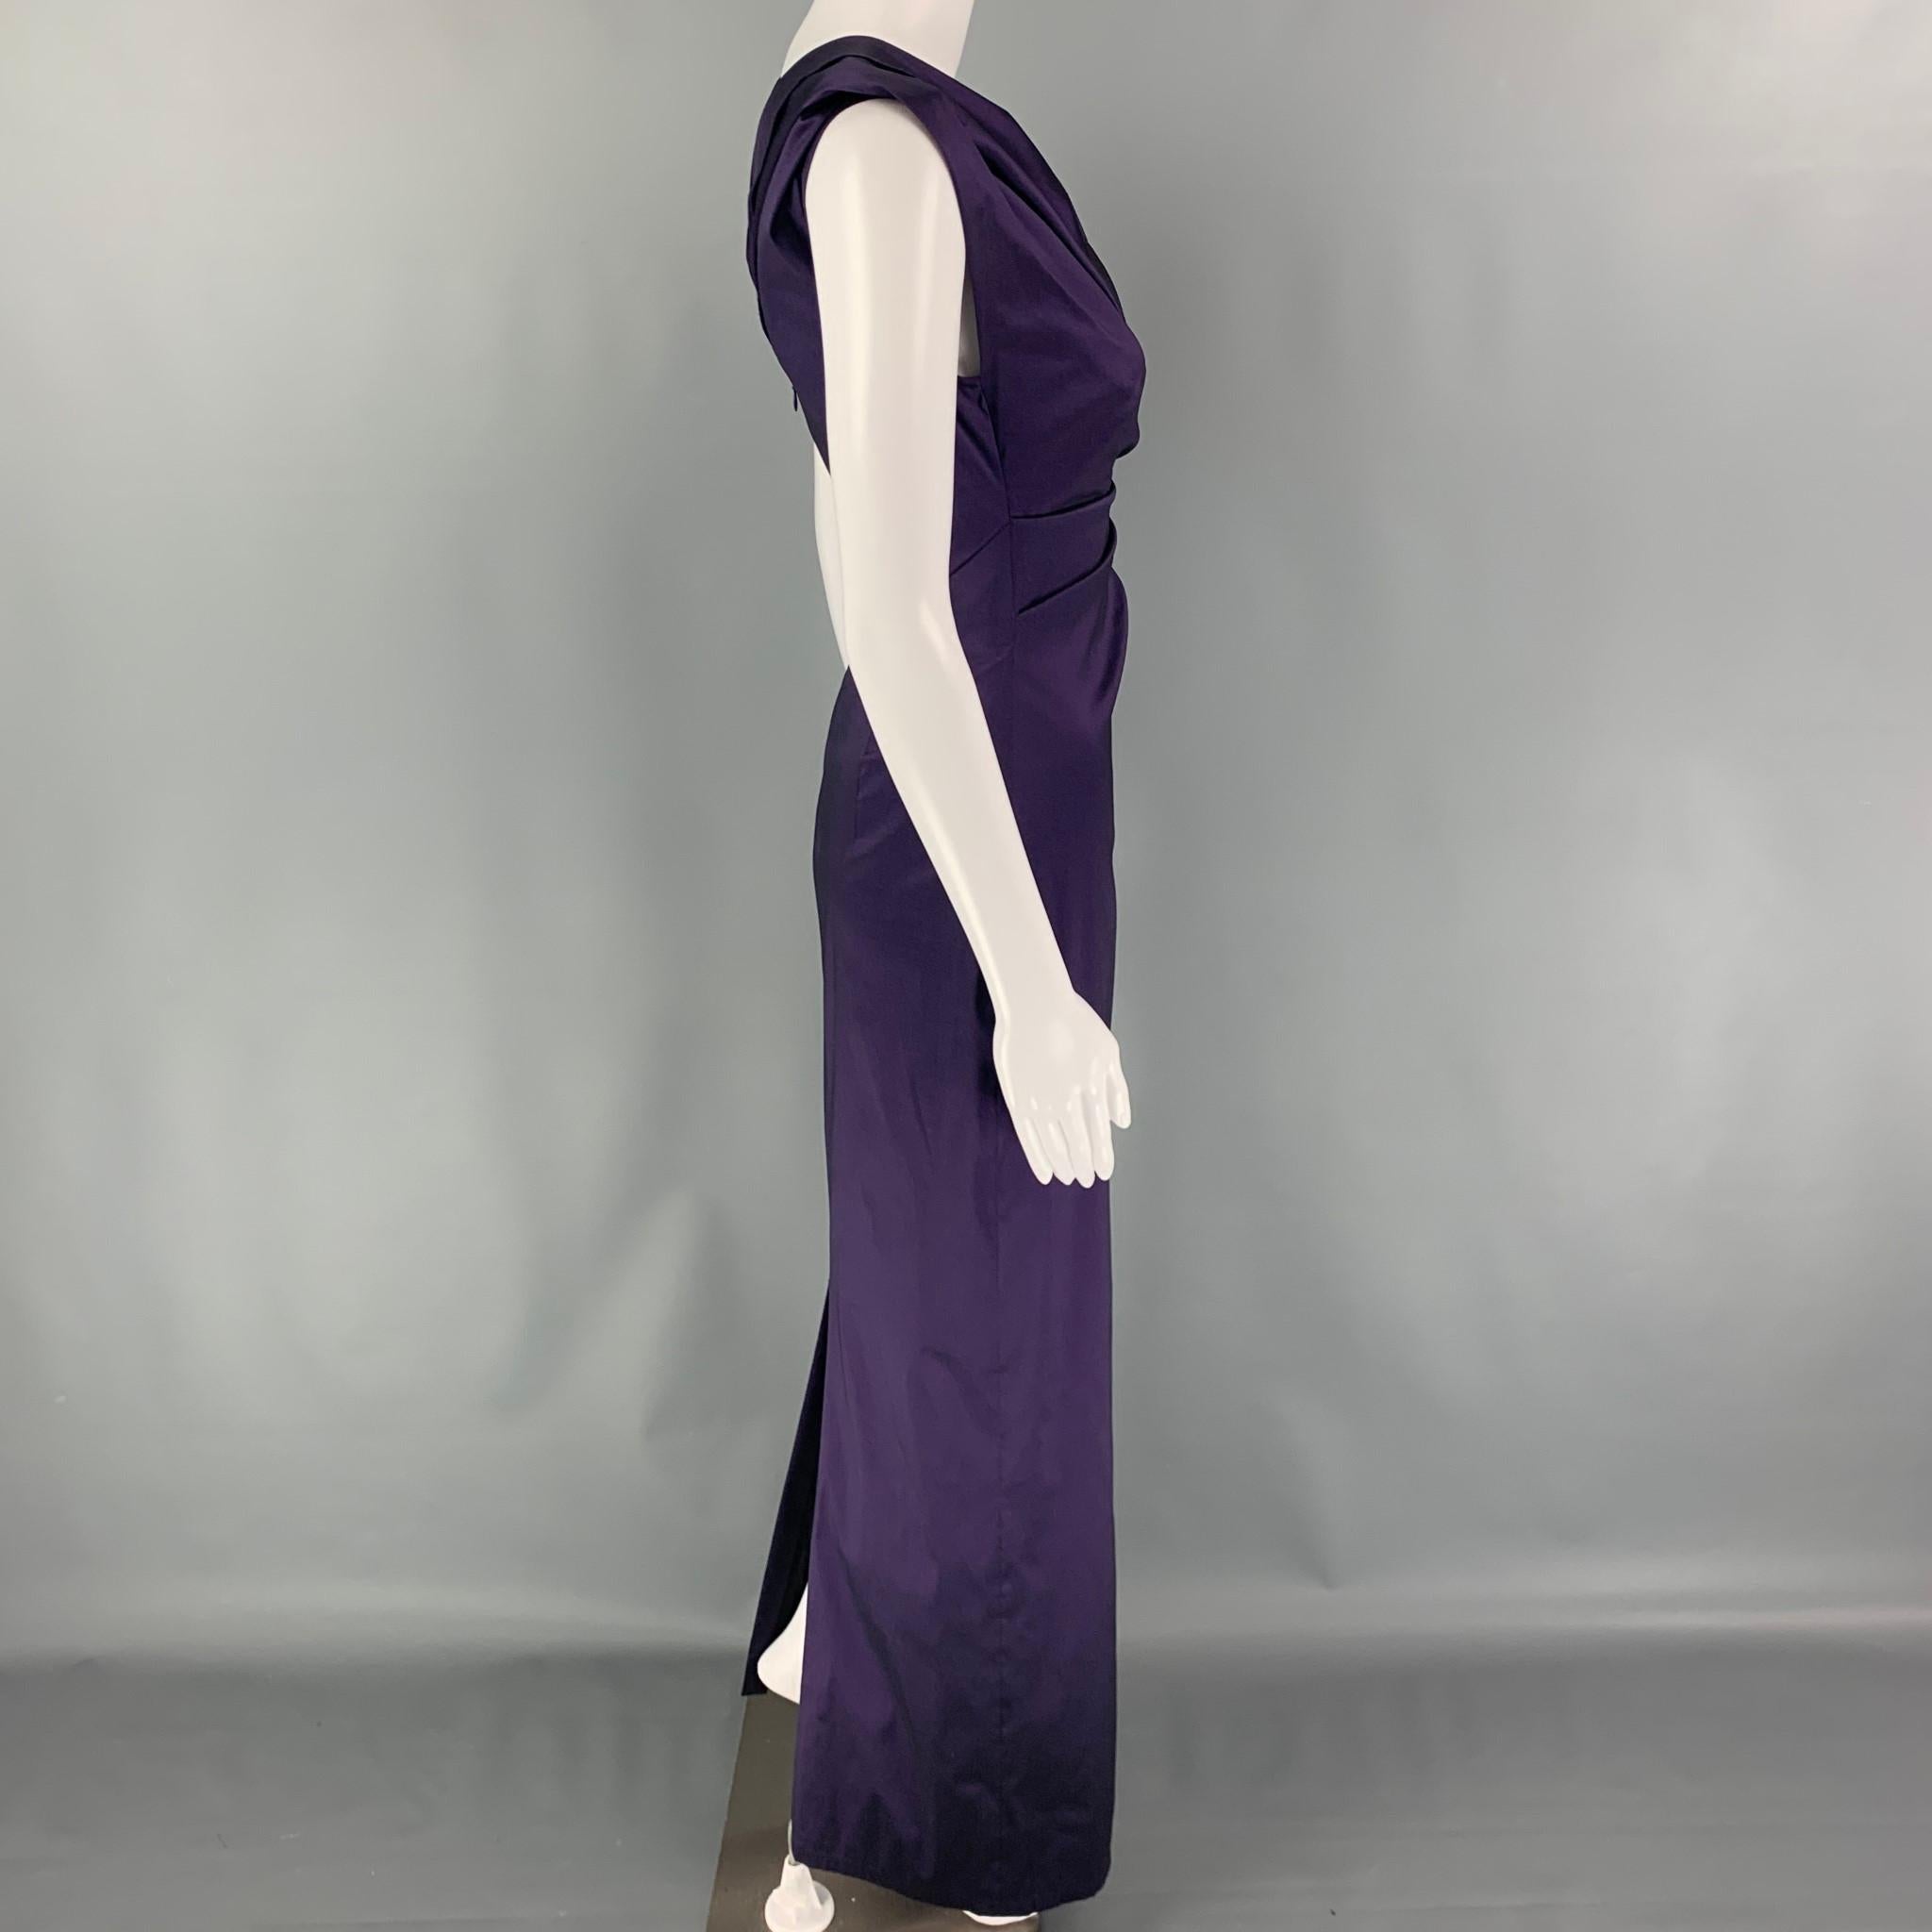 TALBOT RUNHOF dress comes in a purple satin stretch polyester blend featuring a super slim fit, crisscross draping, sleeveless, and a carmen neckline. 

Excellent Pre-Owned Condition.
Marked: 4/34

Measurements:

Bust: 28 in.
Waist: 24 in.
Hip: 30